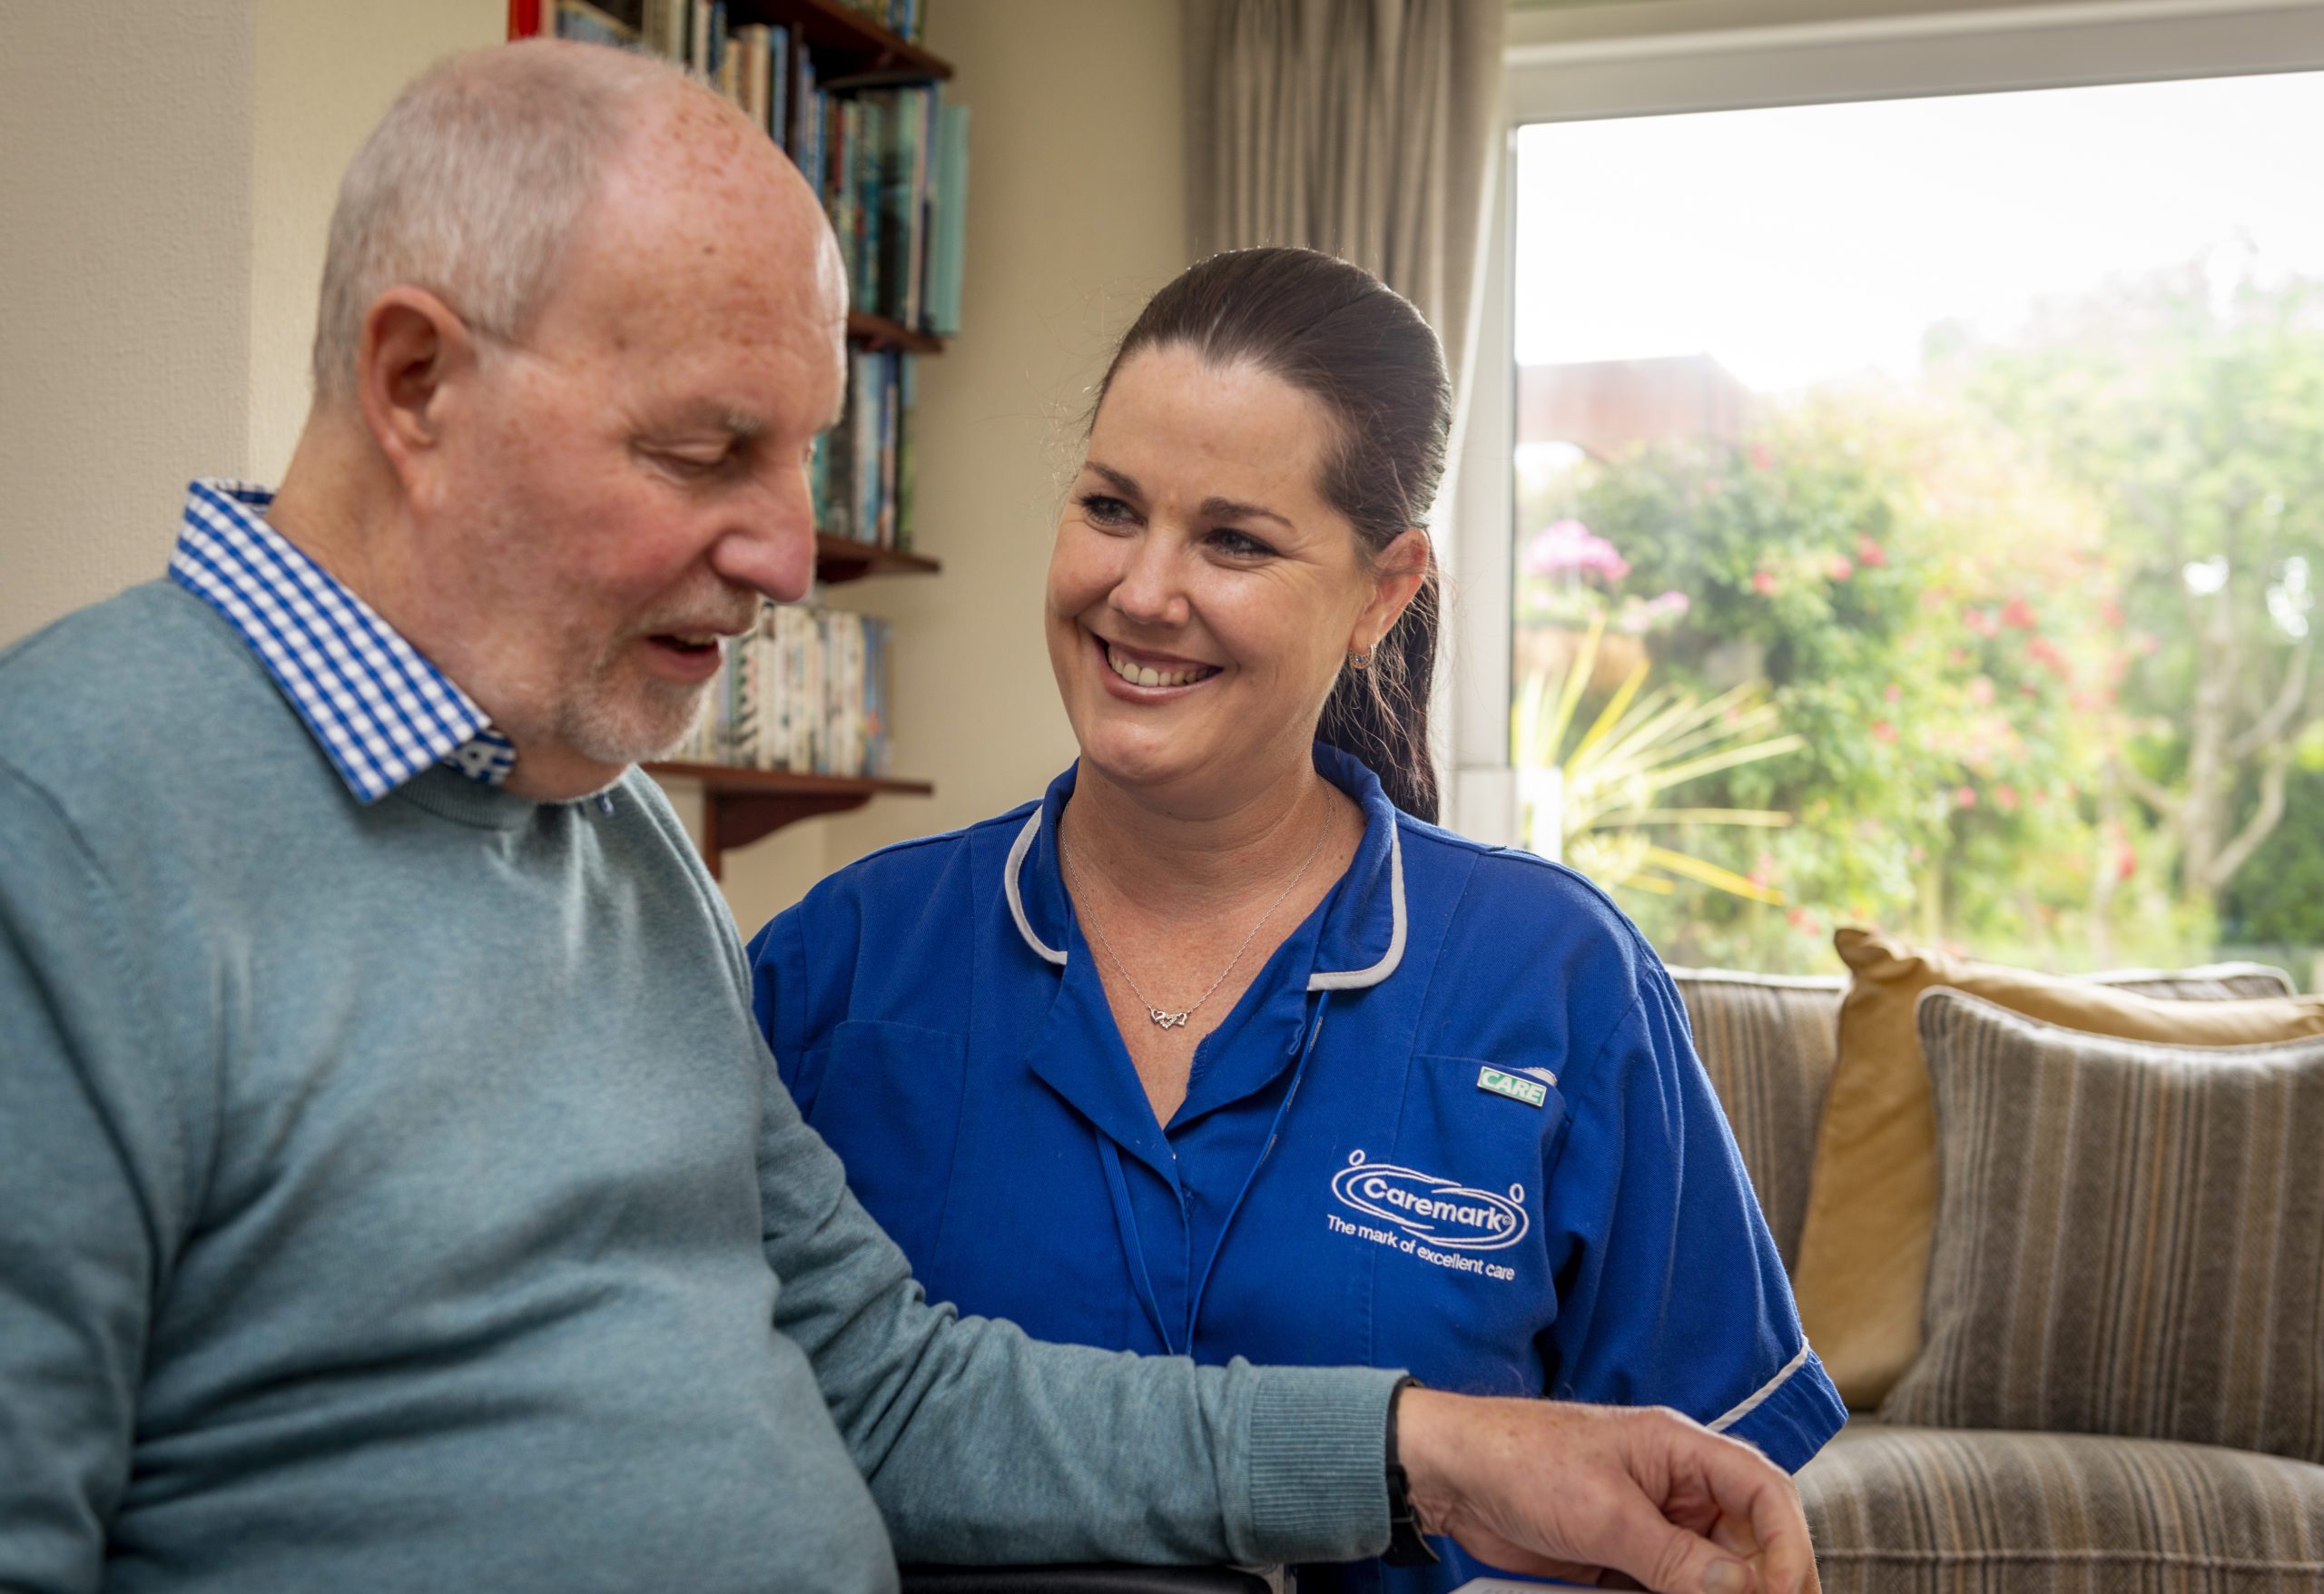 What's The Difference Between Companion Care And Personal Care